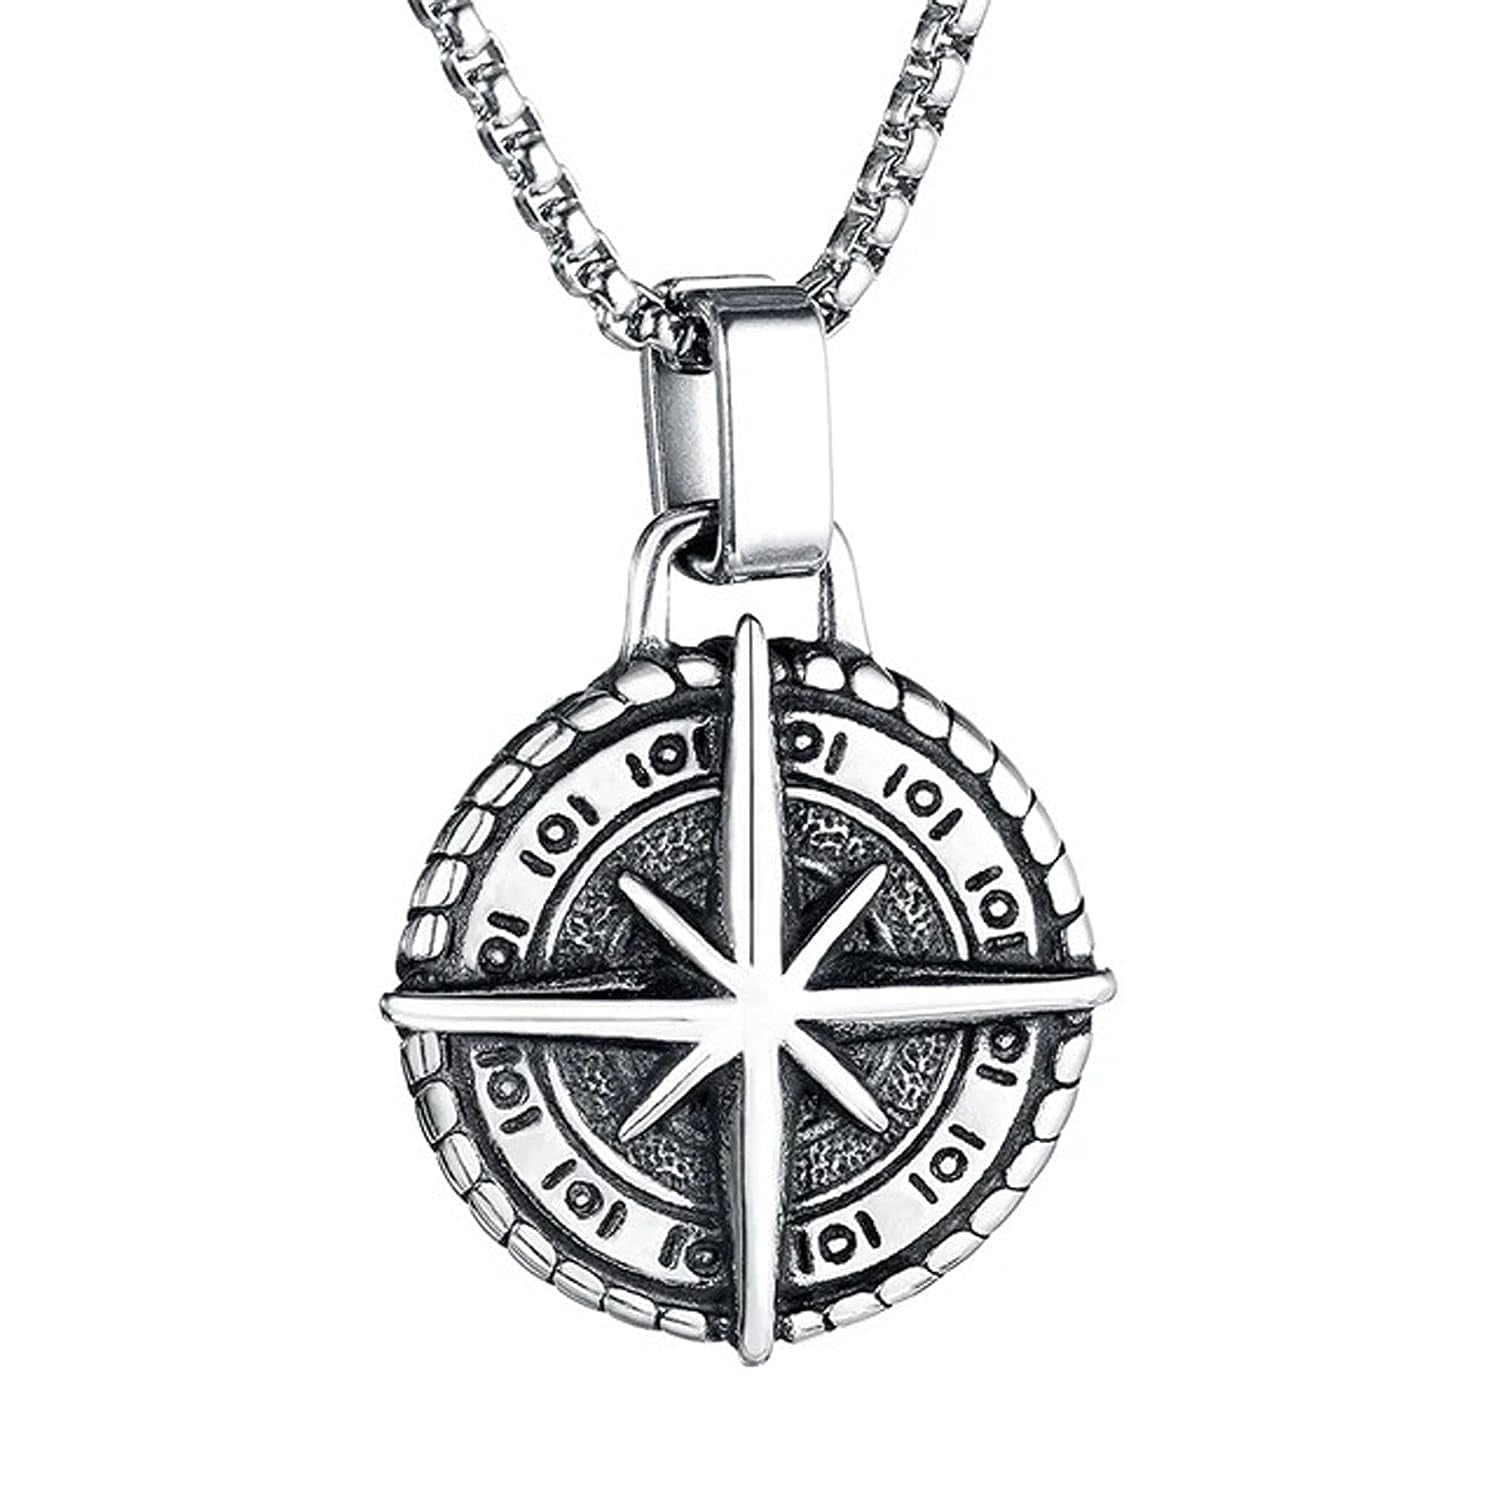 Oxidised Round Pendant Cross Compass Necklace Chain